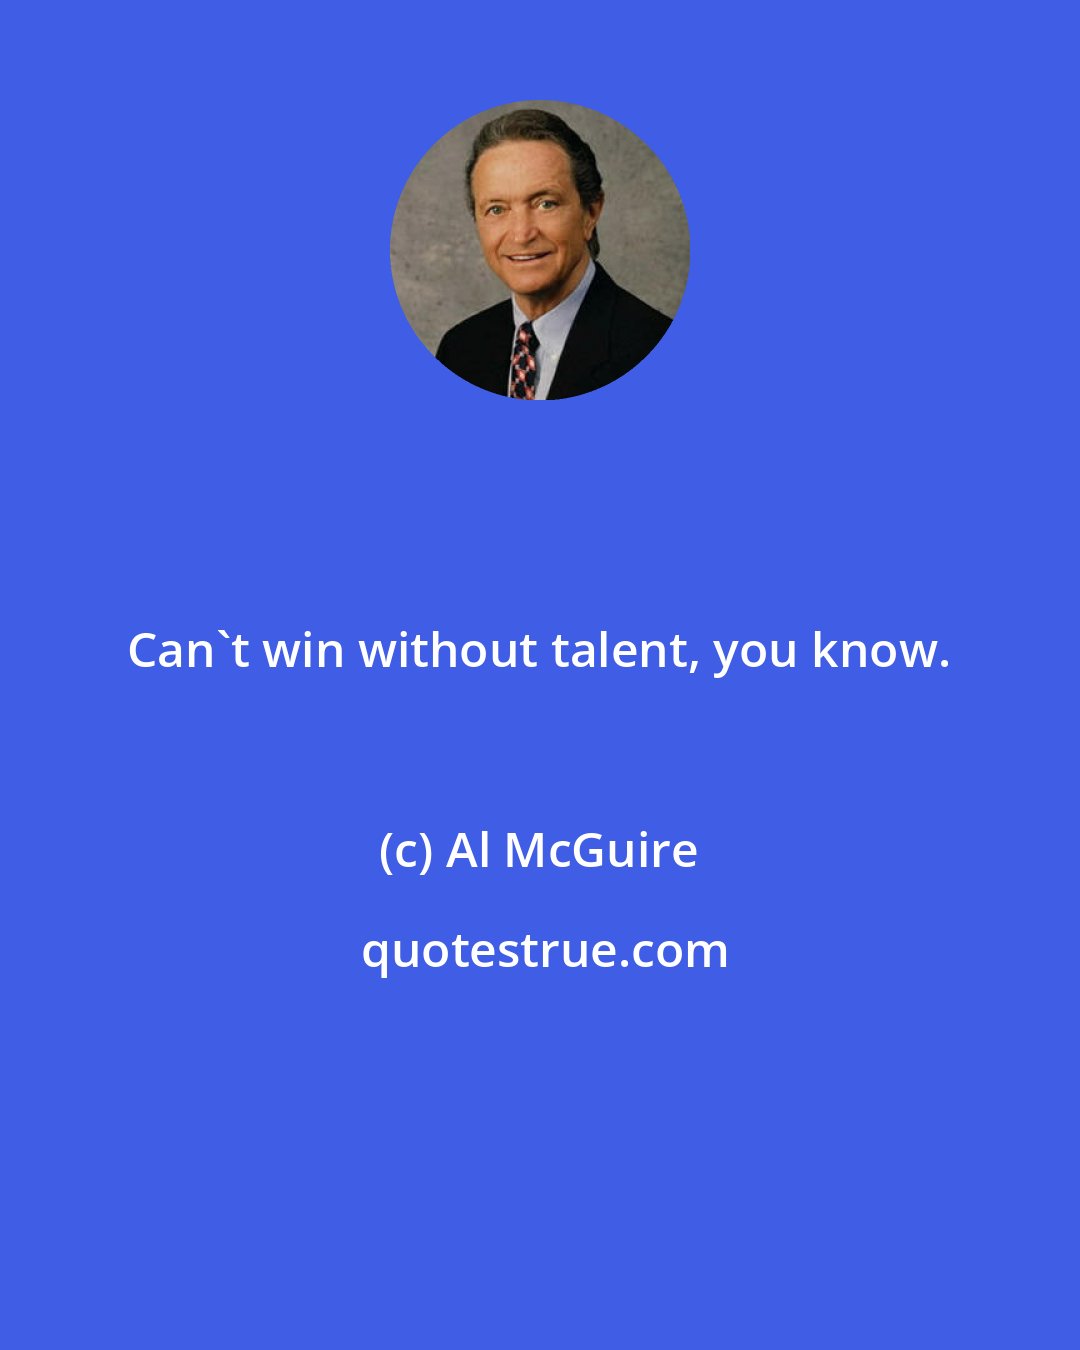 Al McGuire: Can't win without talent, you know.